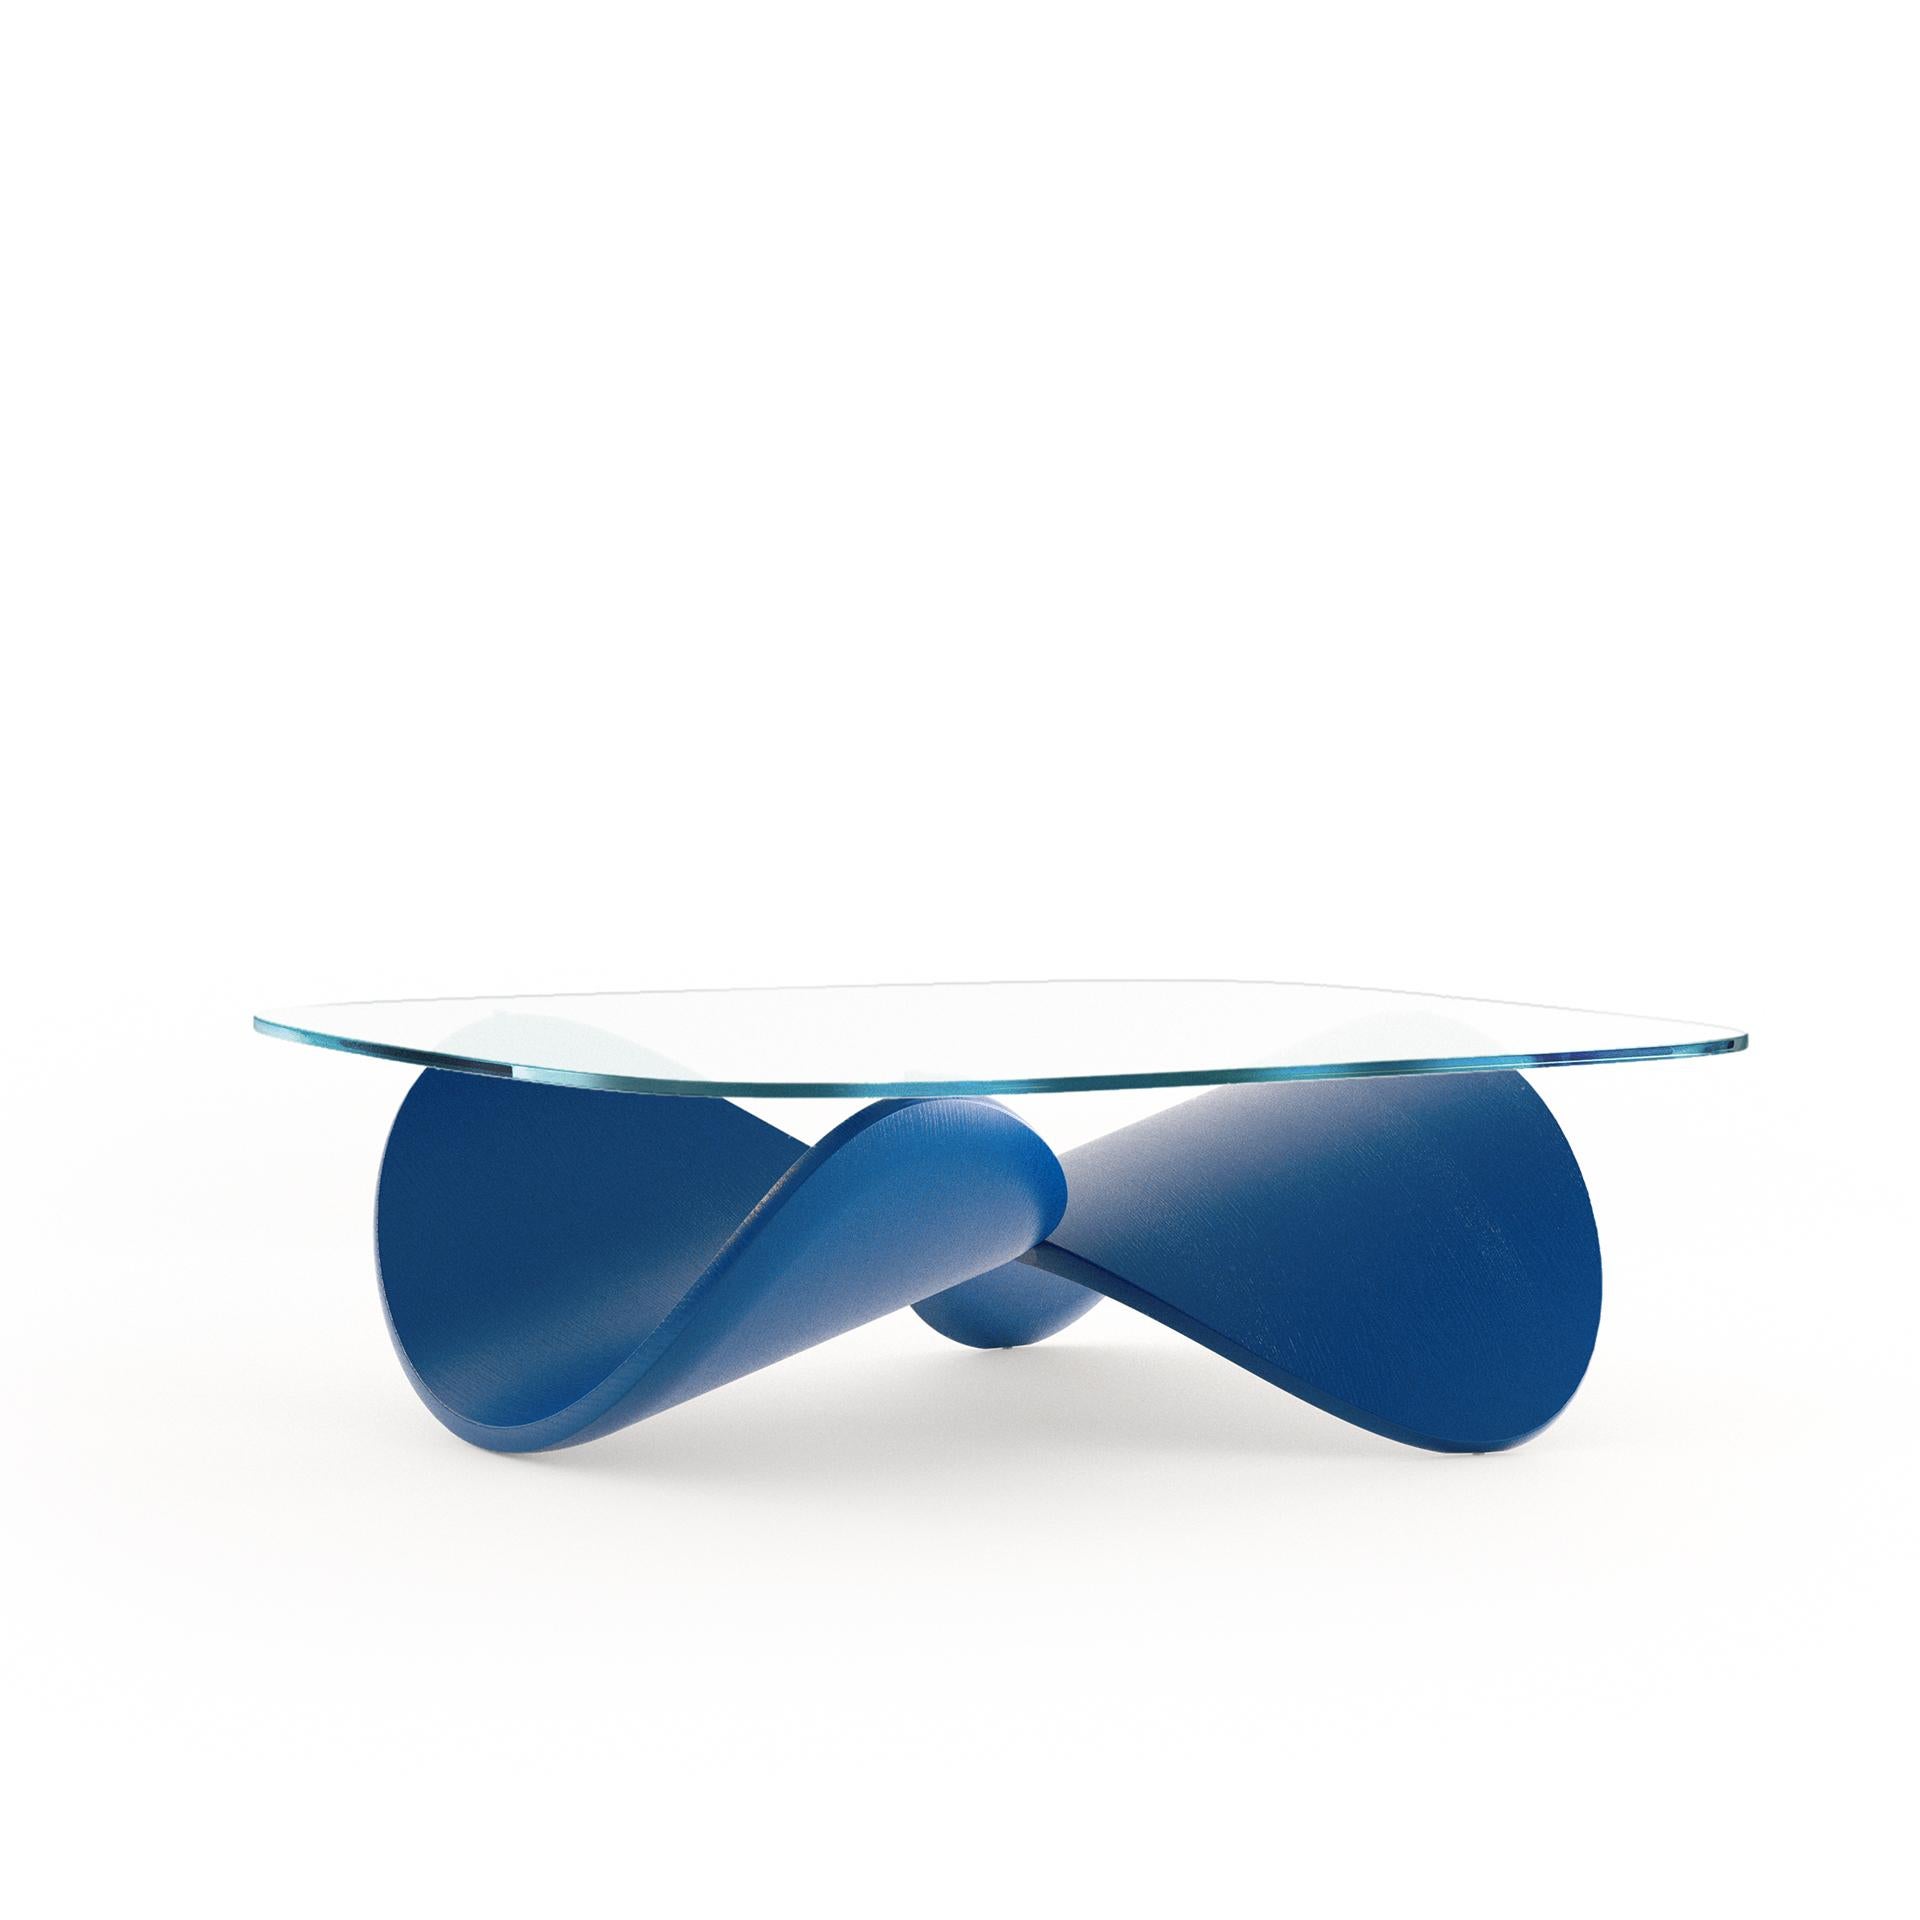 Limited Edition Sculptural Coffee Table, Bent Solid Wood, Blue, Made in Italy In New Condition For Sale In Milano, IT